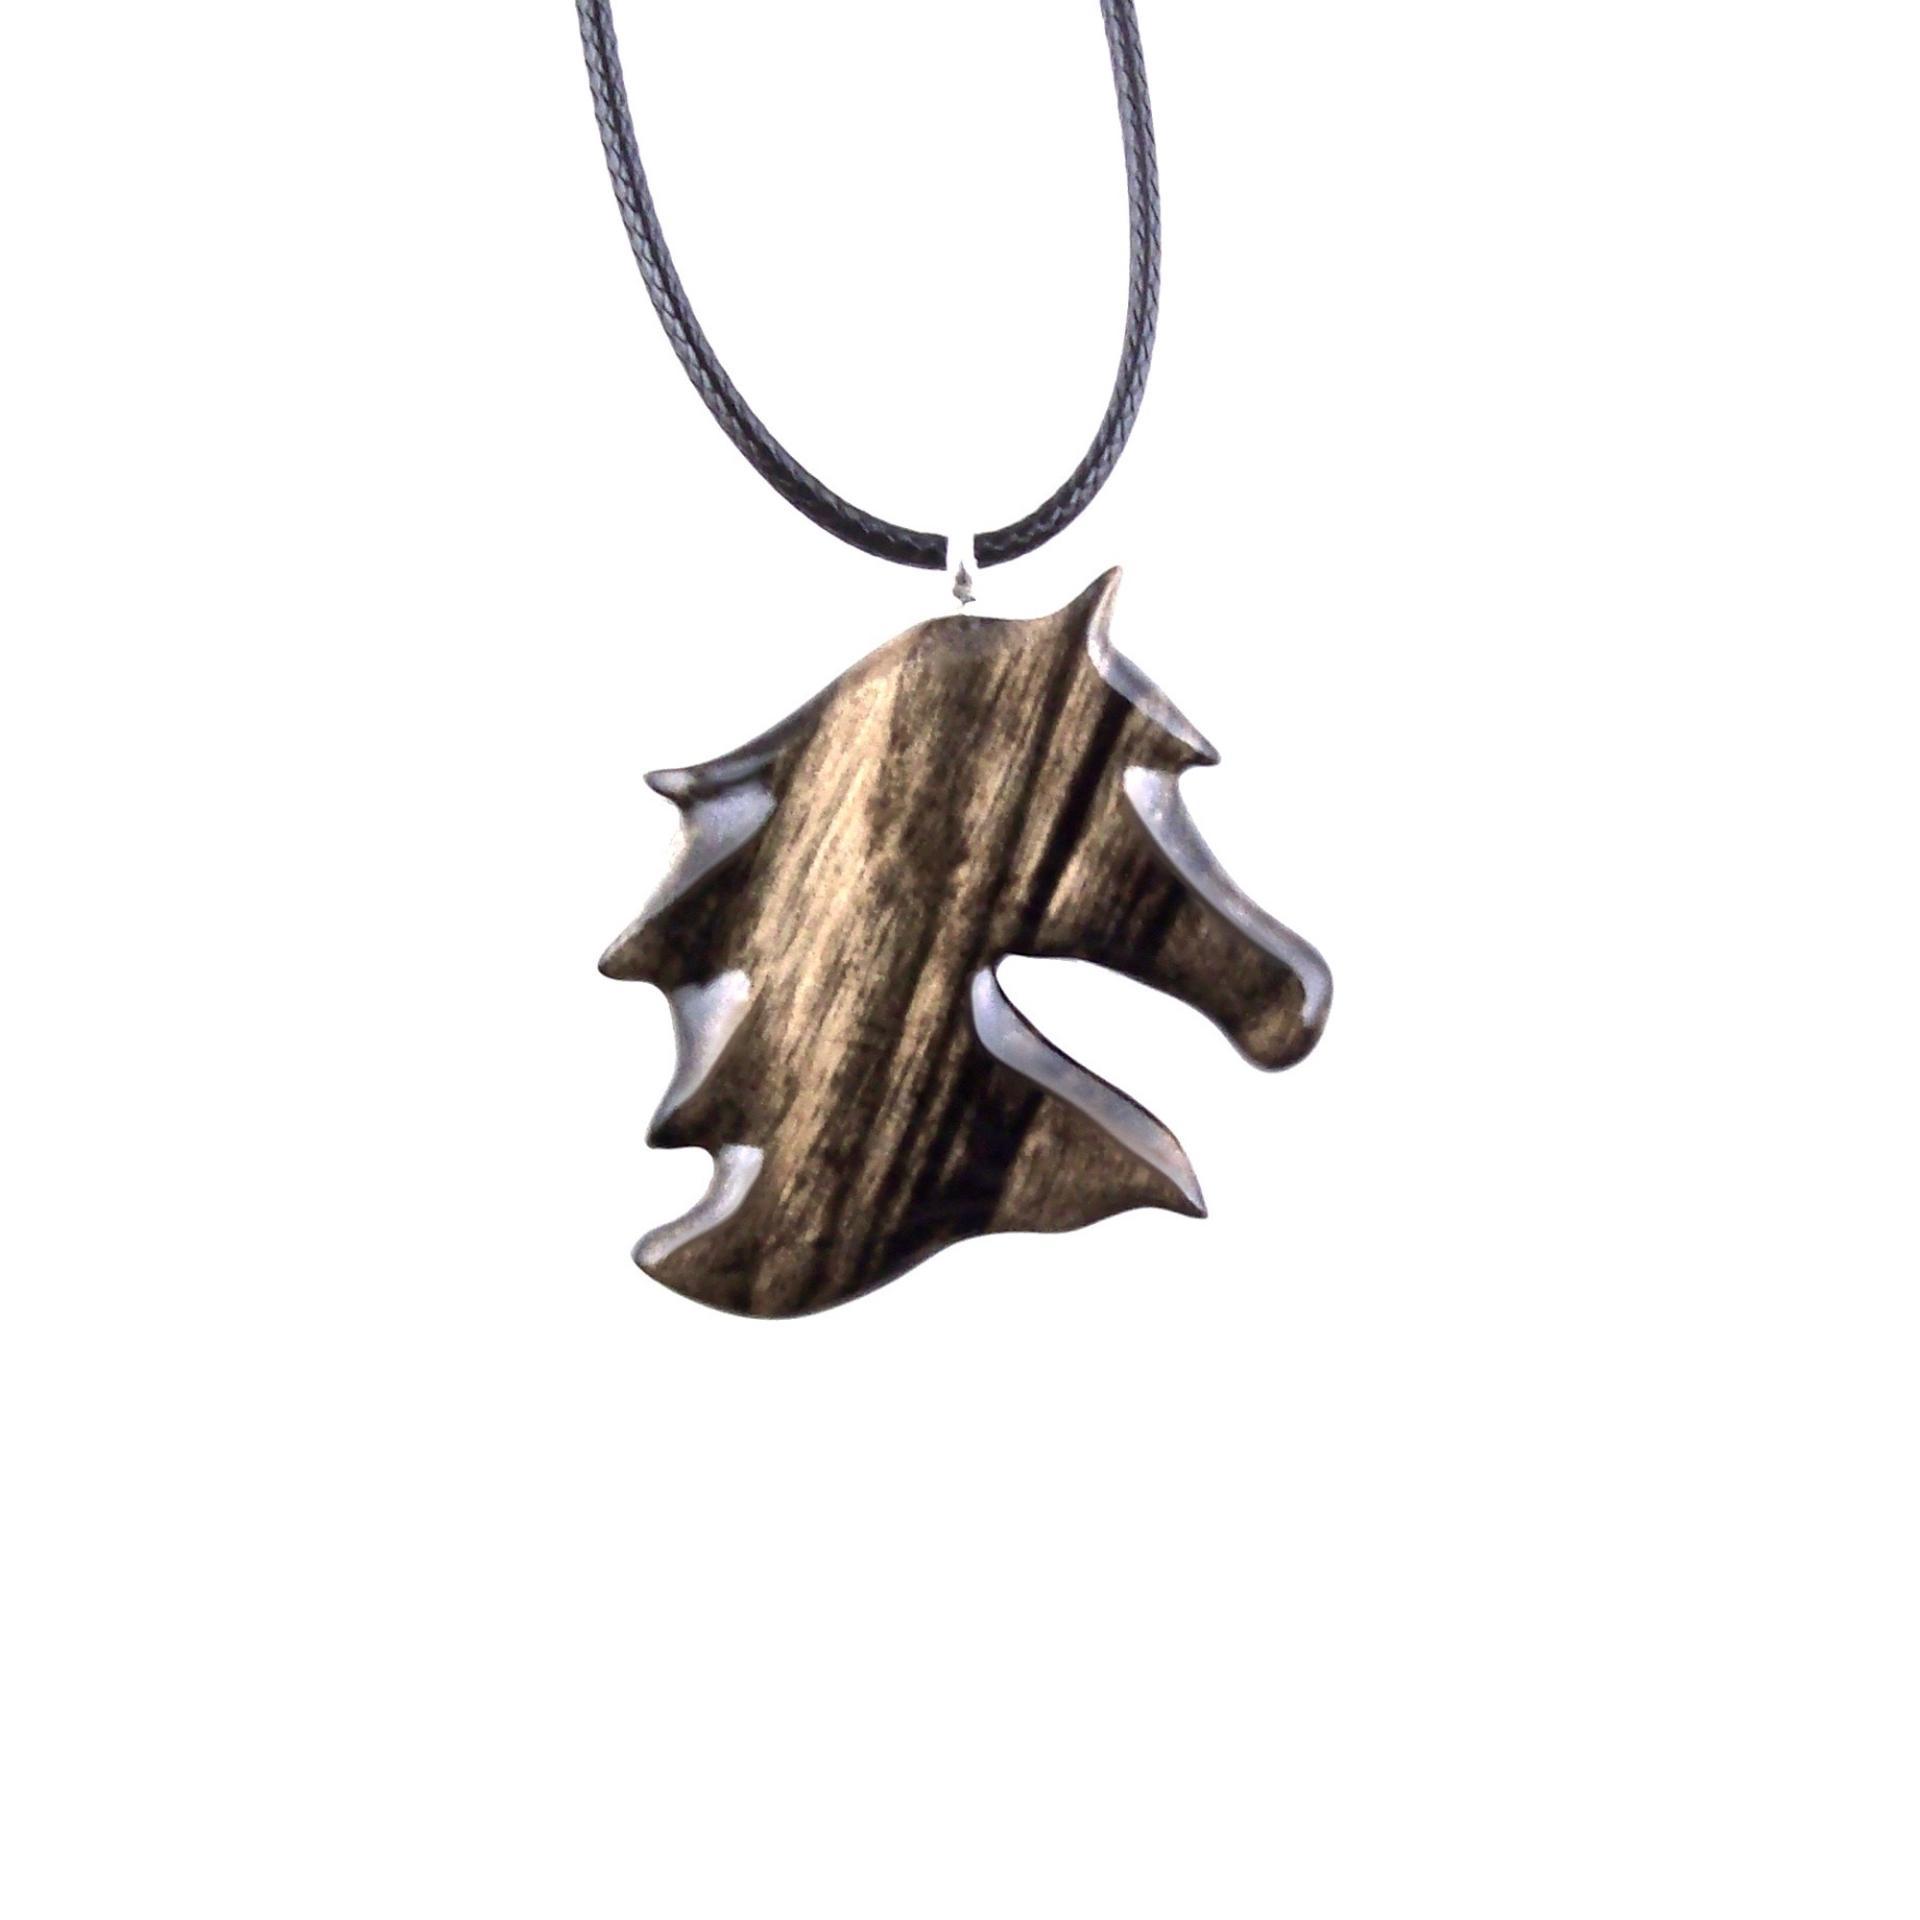 Wooden Horse Head Necklace, Hand Carved Horse Pendant for Men Women, Wood Equestrian Jewelry Gift for Him Her